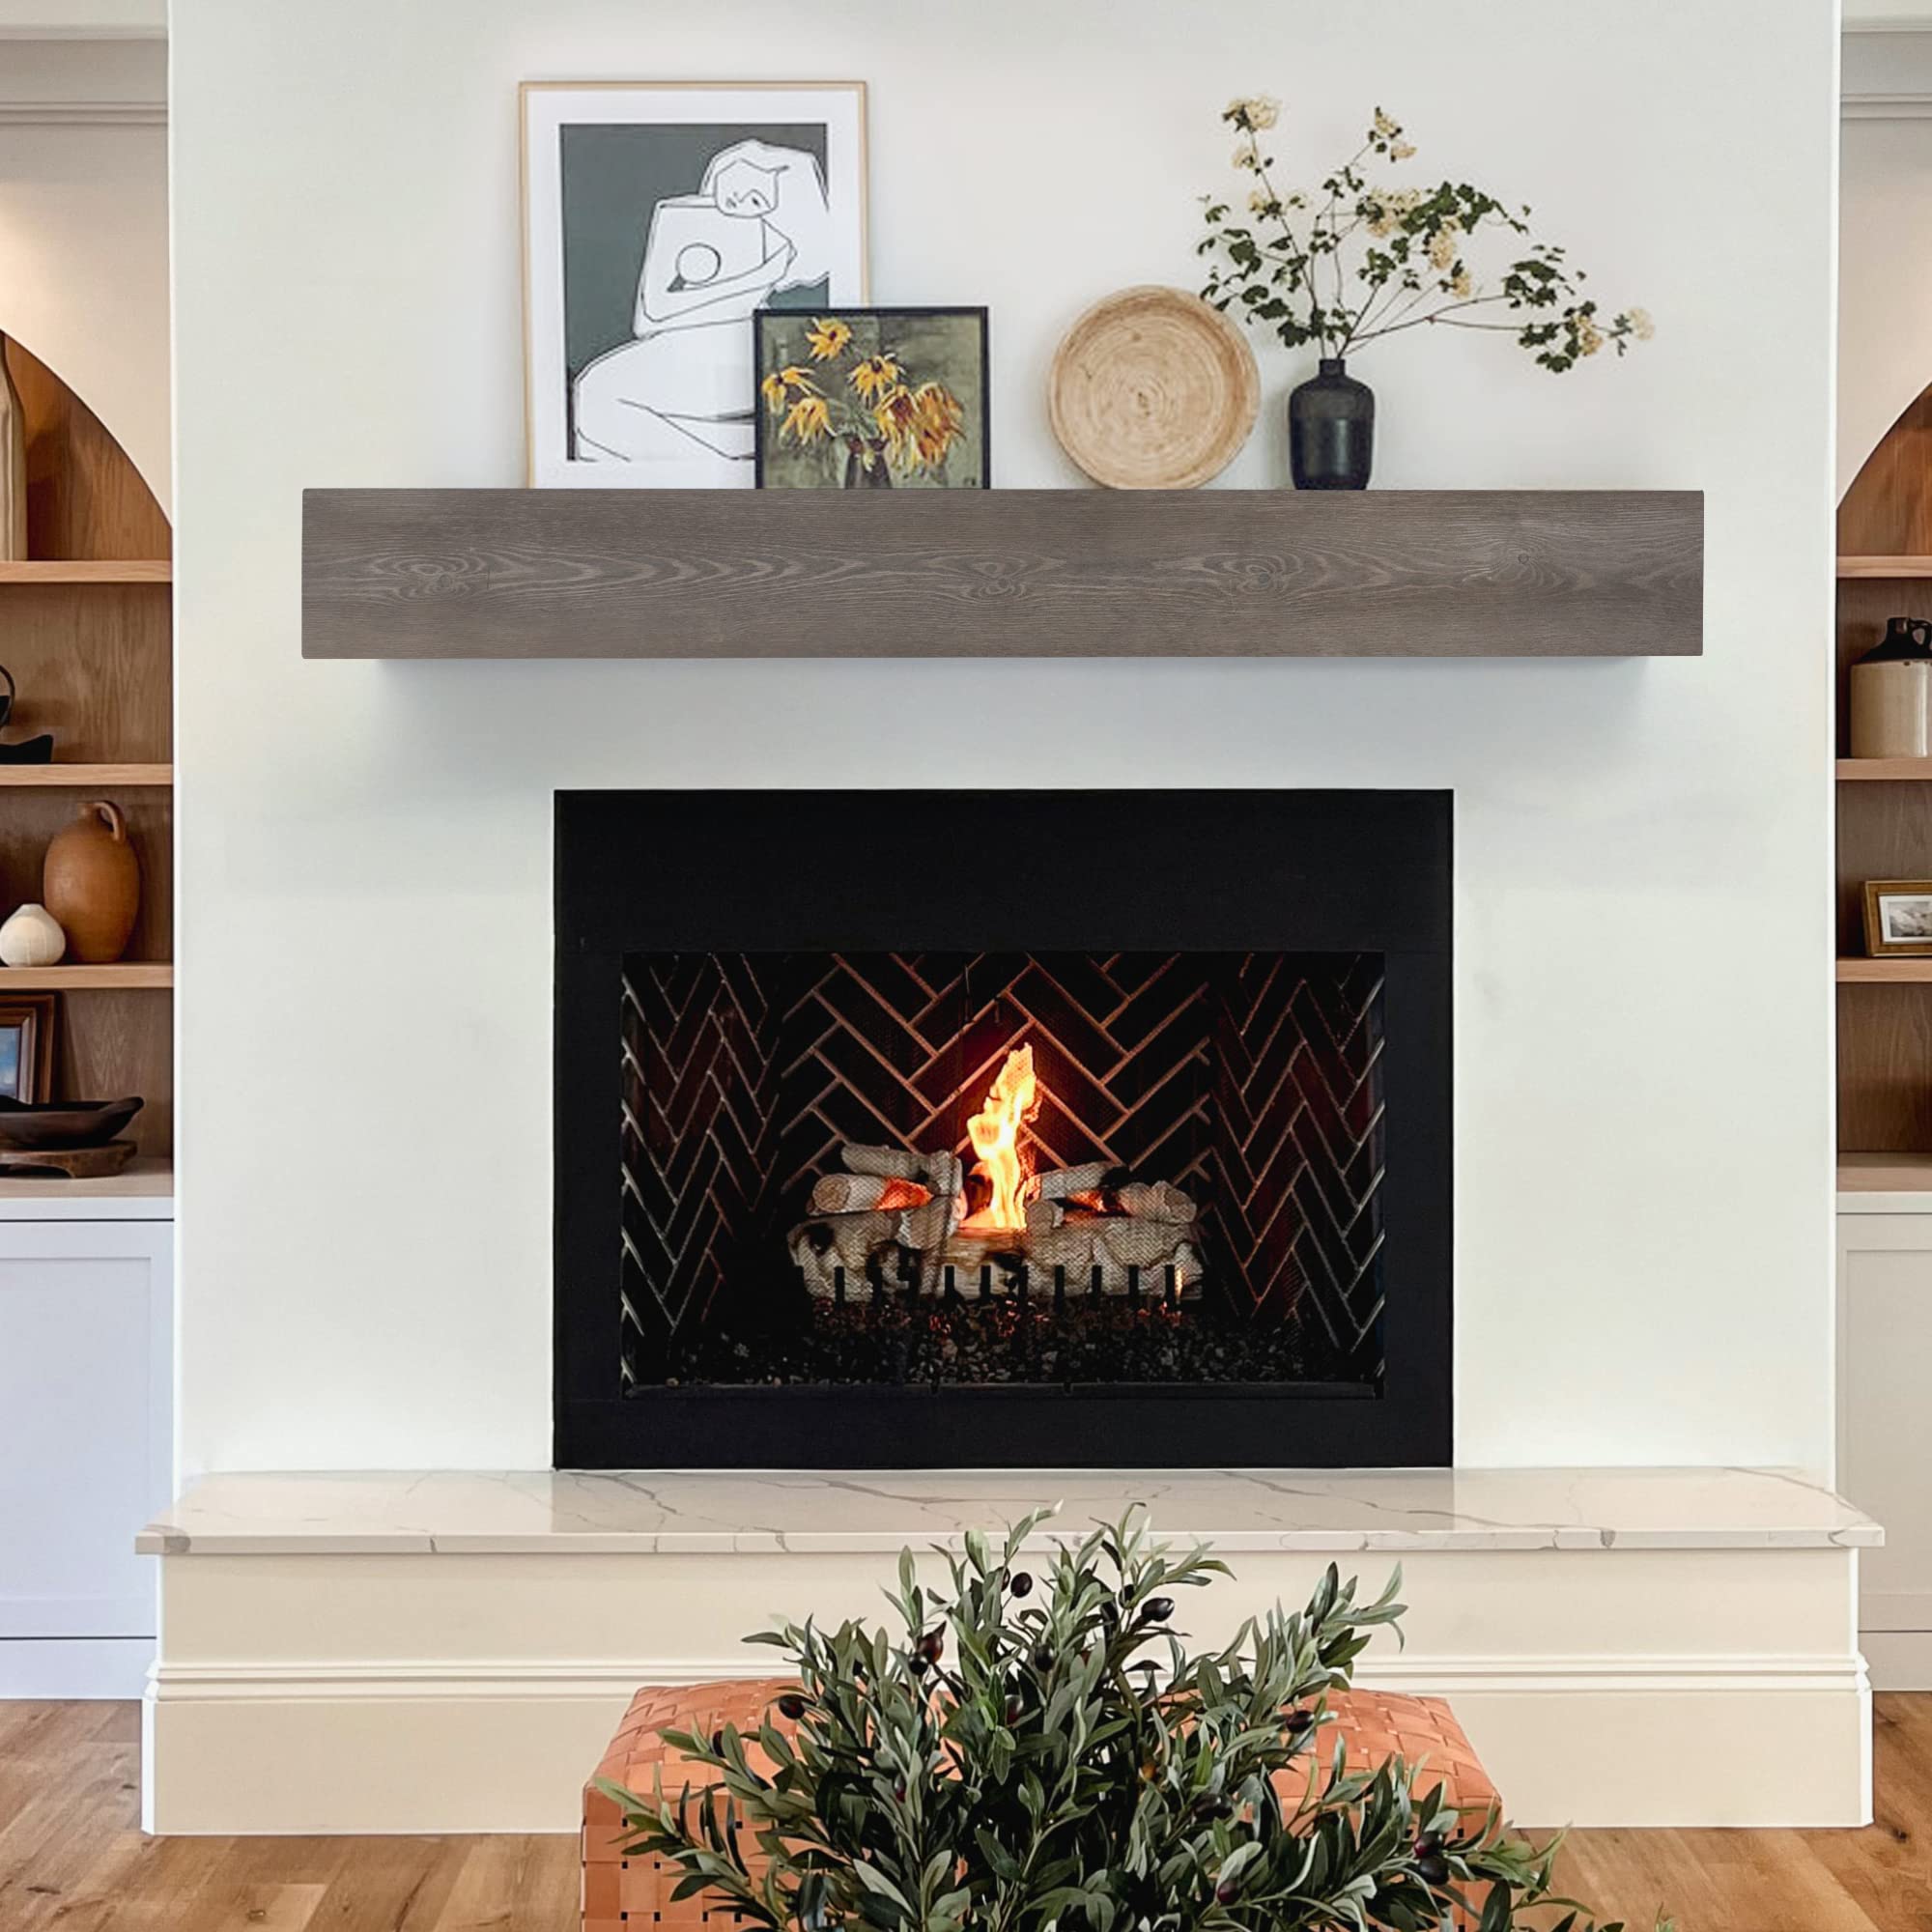 Thick-Wooden-Shelf-Above-the-Fireplace